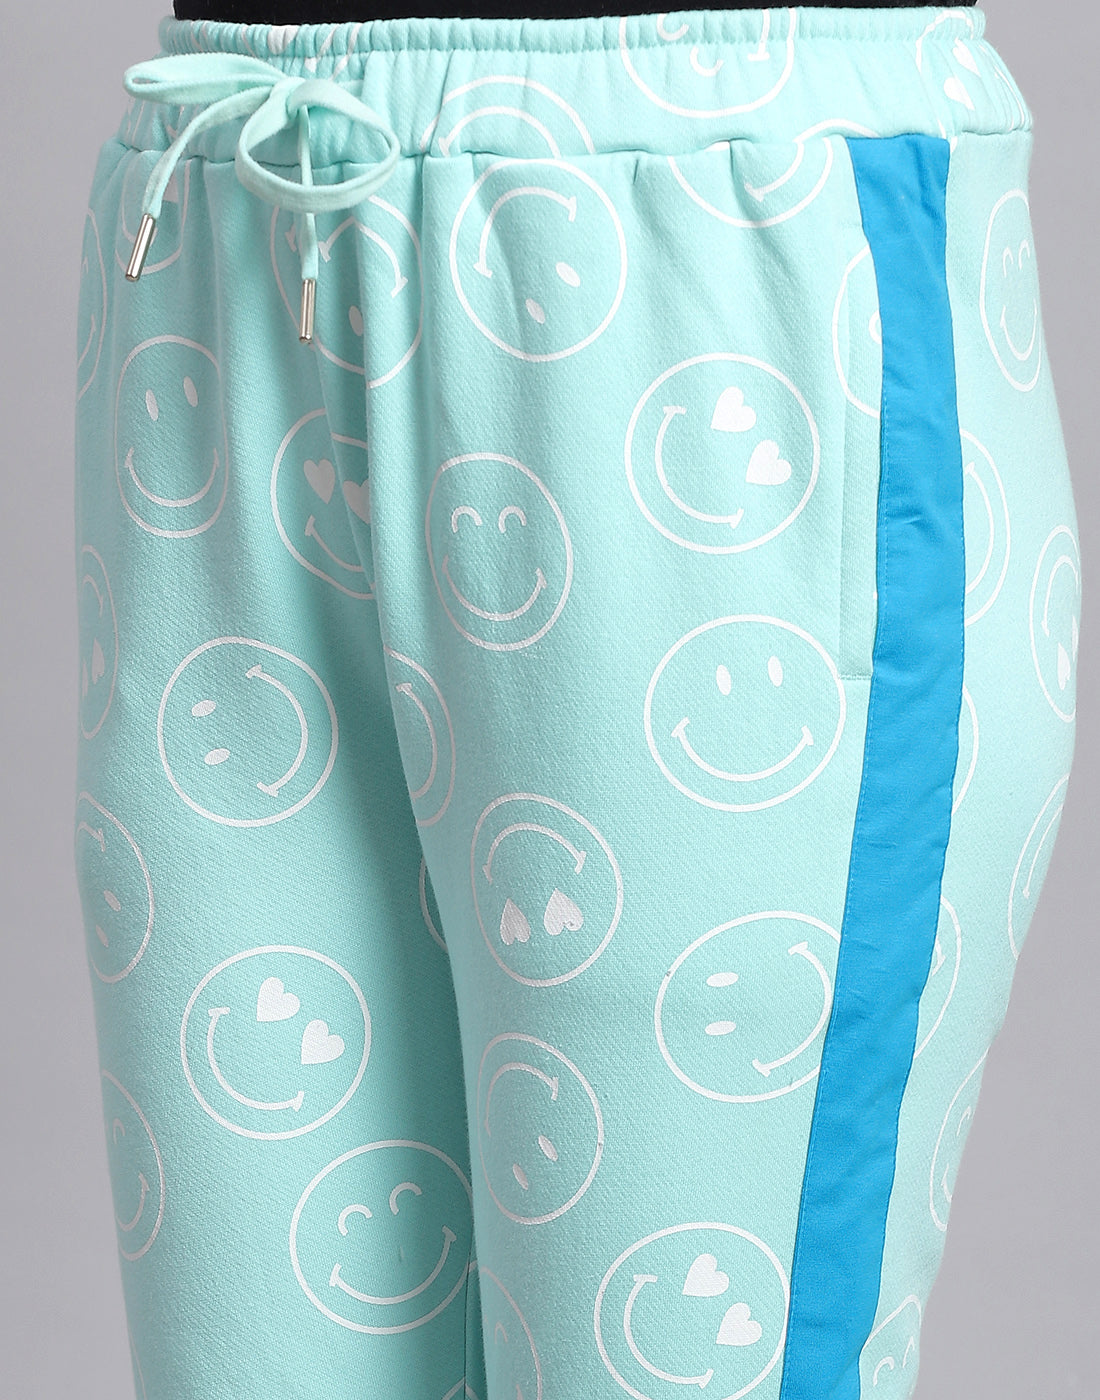 Girls Turquoise Blue Printed Hooded Full Sleeve Cords Set